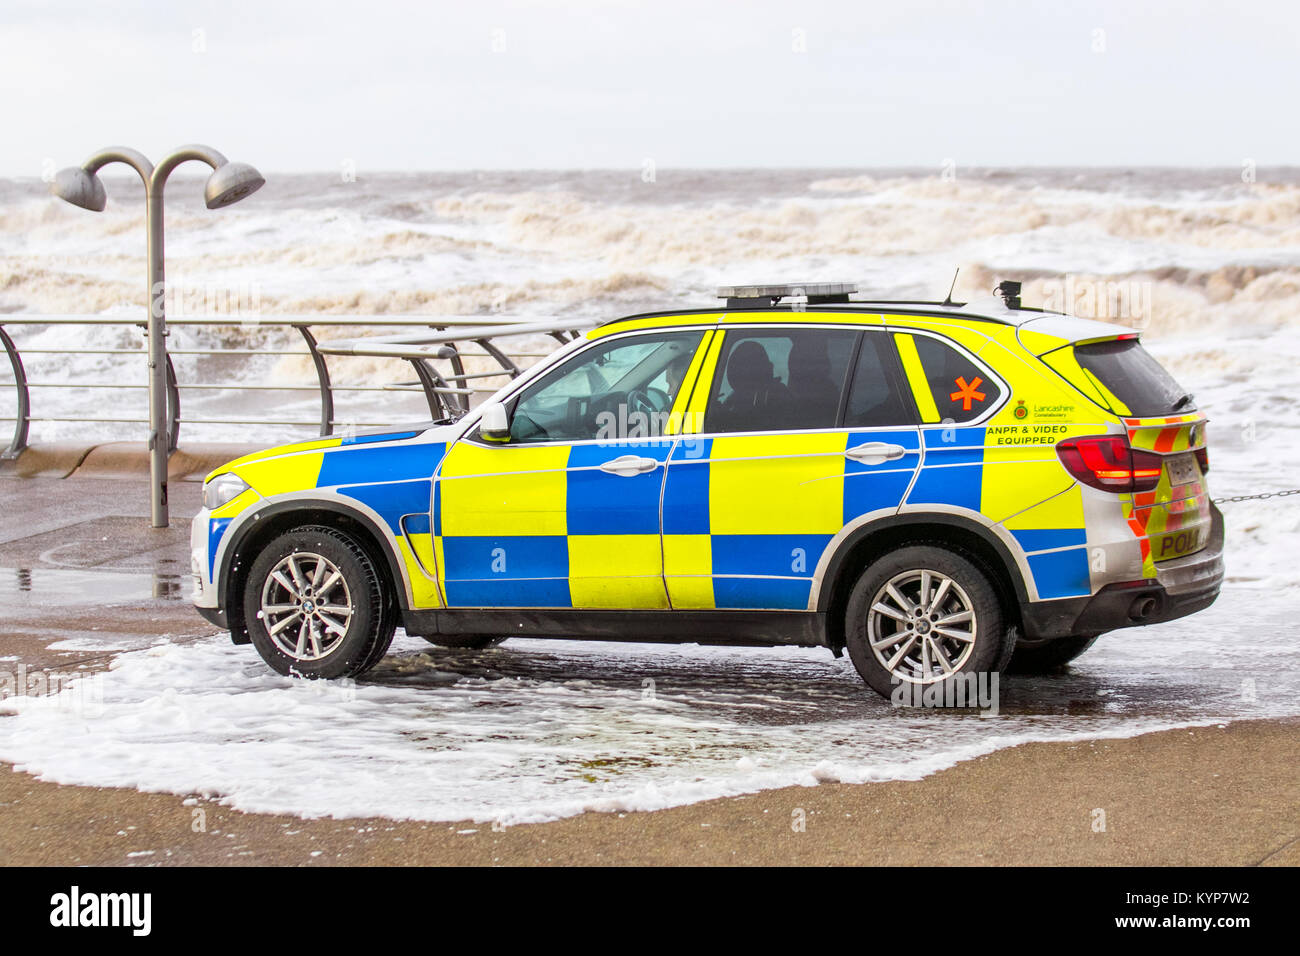 Blackpool Lancashire. 16th Jan 2018. UK Weather. Gale Force Winds in Blackpool. An amber 'be prepared' warning, which includes winds gusting up to 50mph in some areas, has been issued for north west coasts of England. Armed response vehicle (ARV) is a type of BMW police car operated by British law enforcement, policing vehicle, armed, military, protection, weapon, man, people, security, gun, car, street, force, officers.  ARVs Police cars are crewed by Authorised Firearms Officers to respond to incidents believed to involve firearms or other high-risk situations. Stock Photo